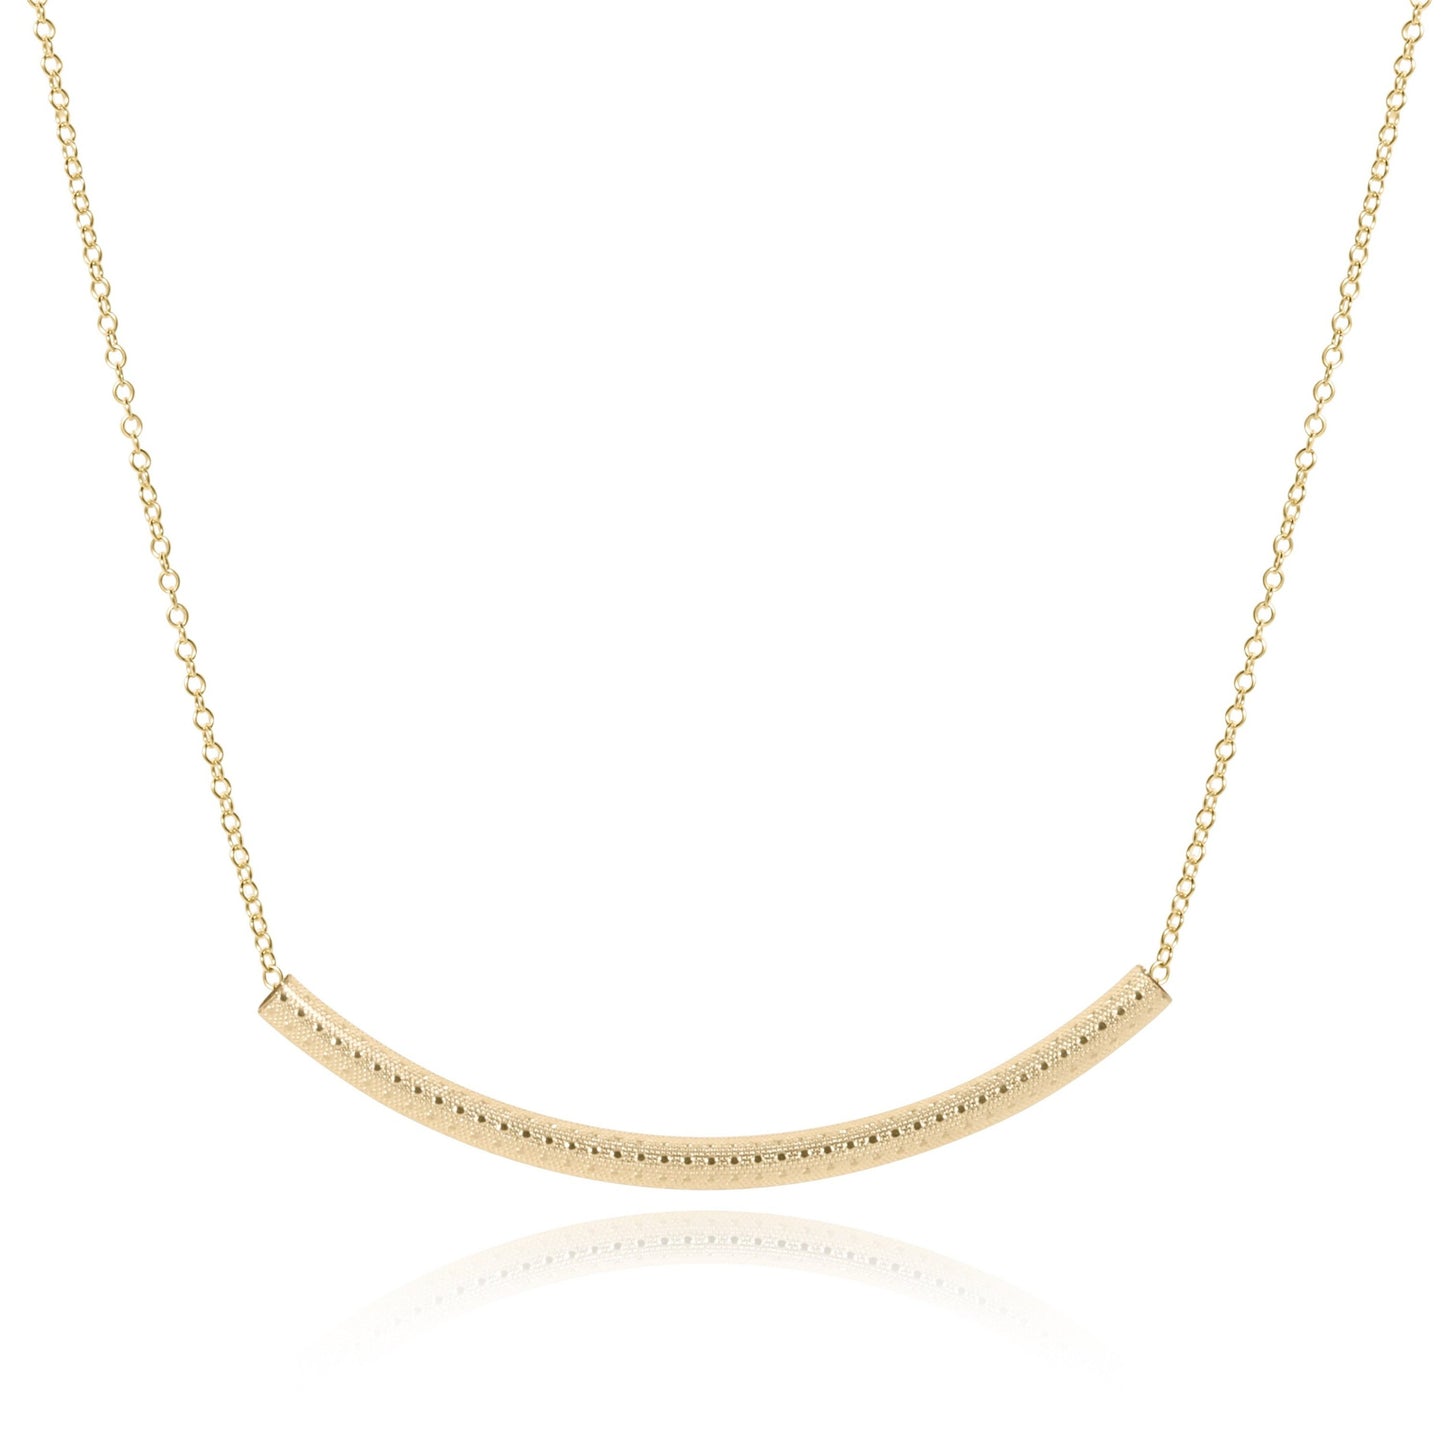 16" Bliss Bar Textured Gold Necklace